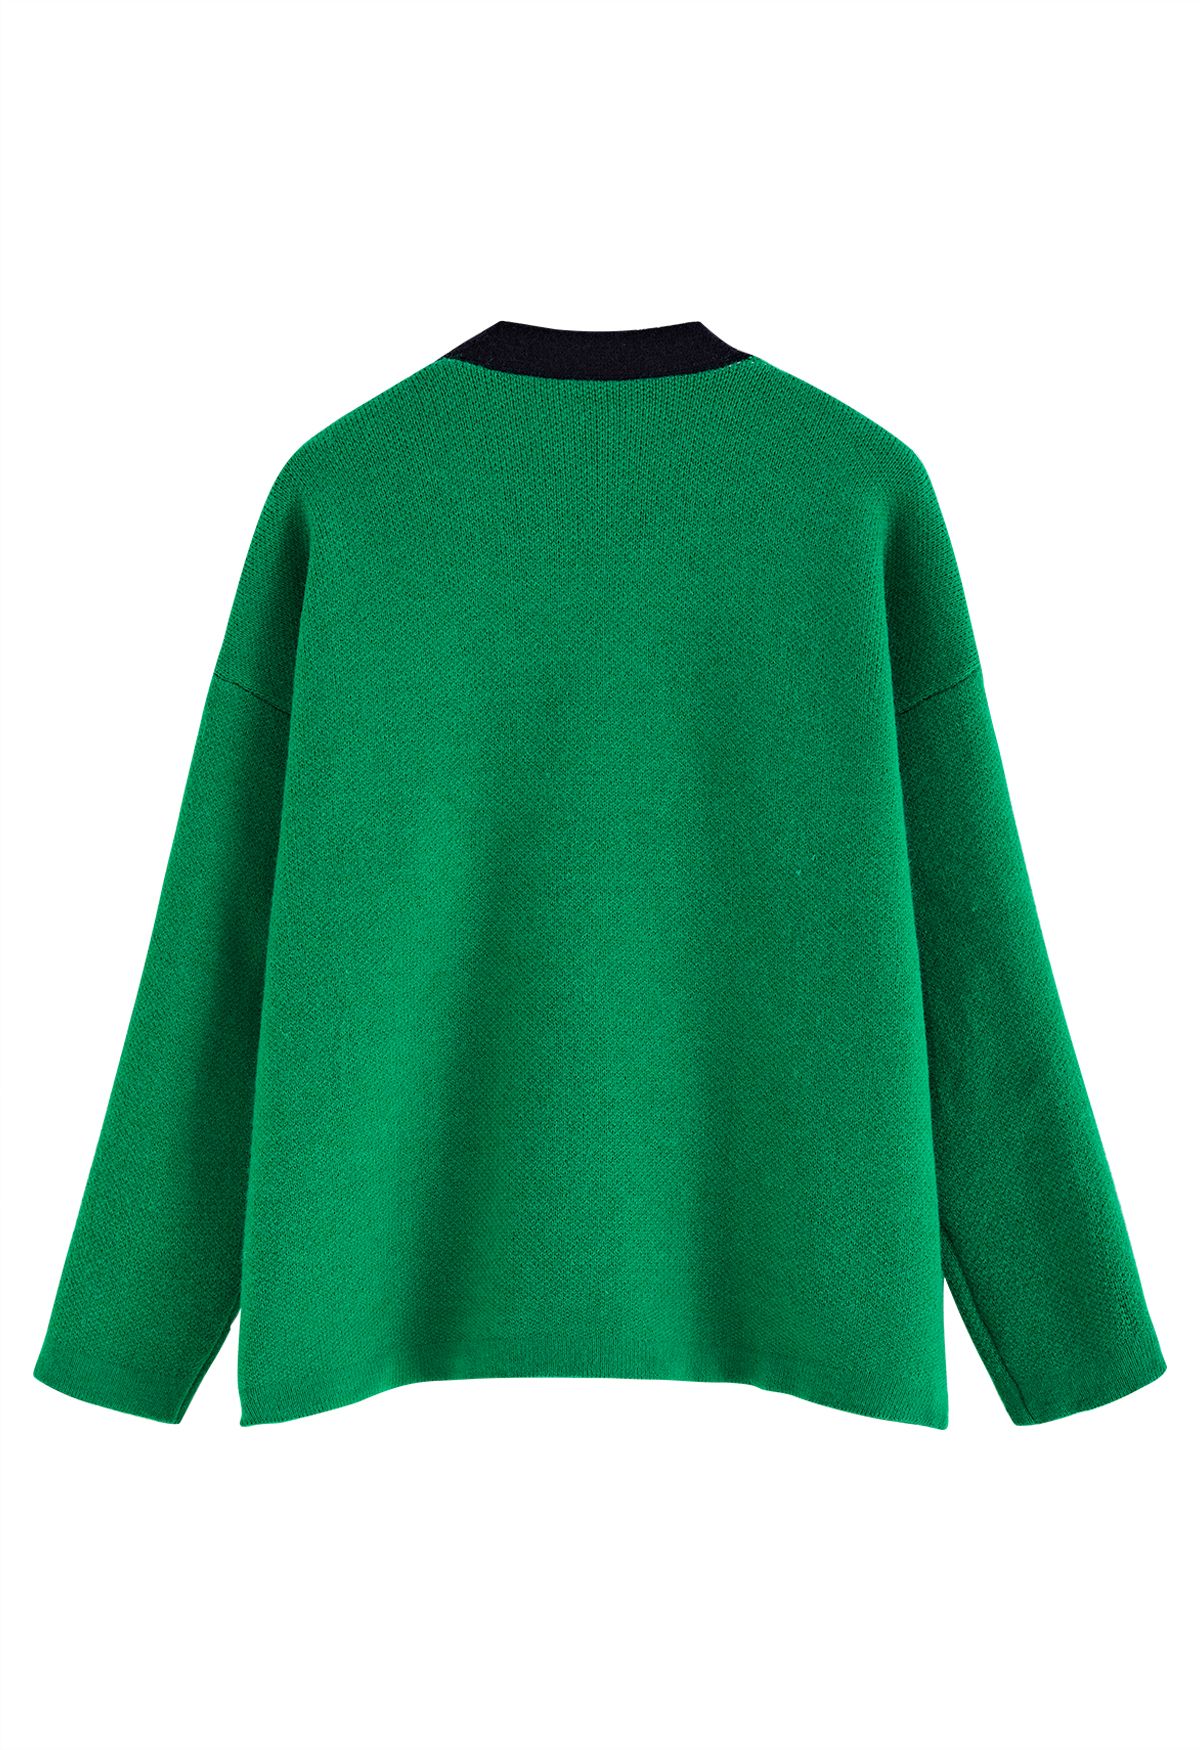 Double-Breasted Contrast Color Cardigan in Green